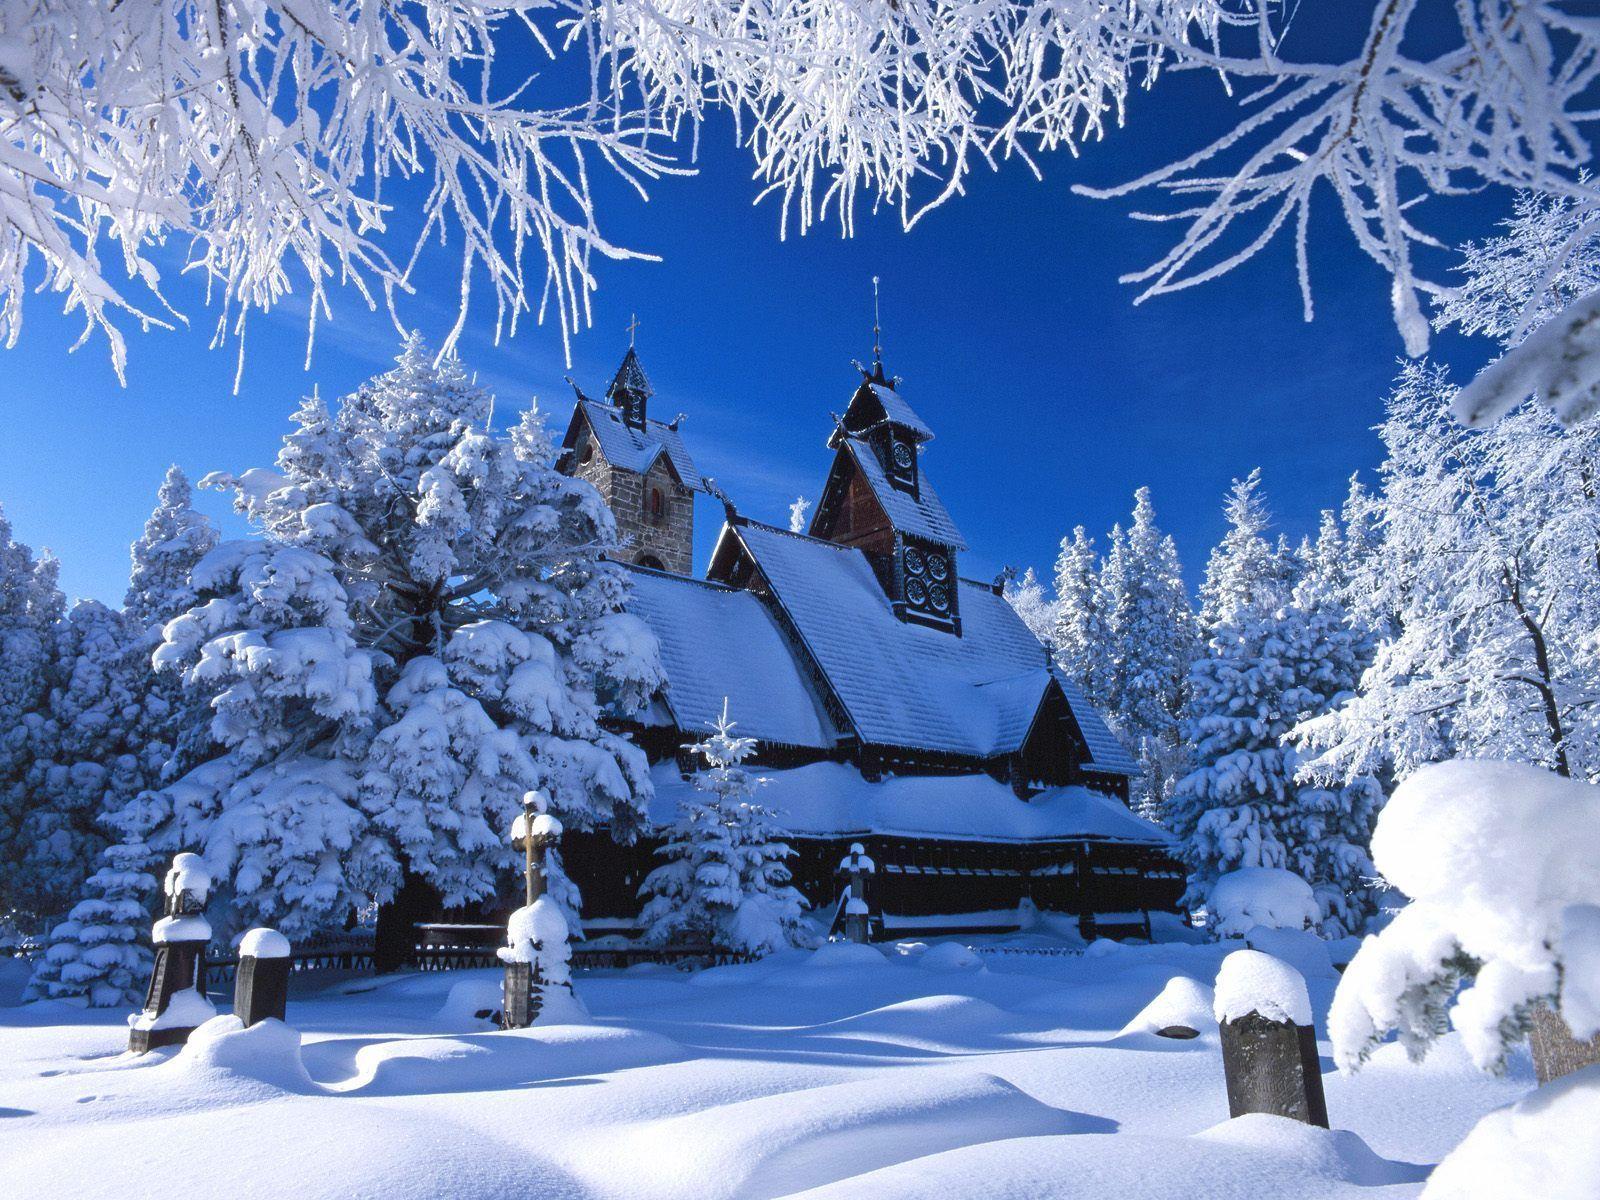 Wallpaper of Winter. HD Background Point